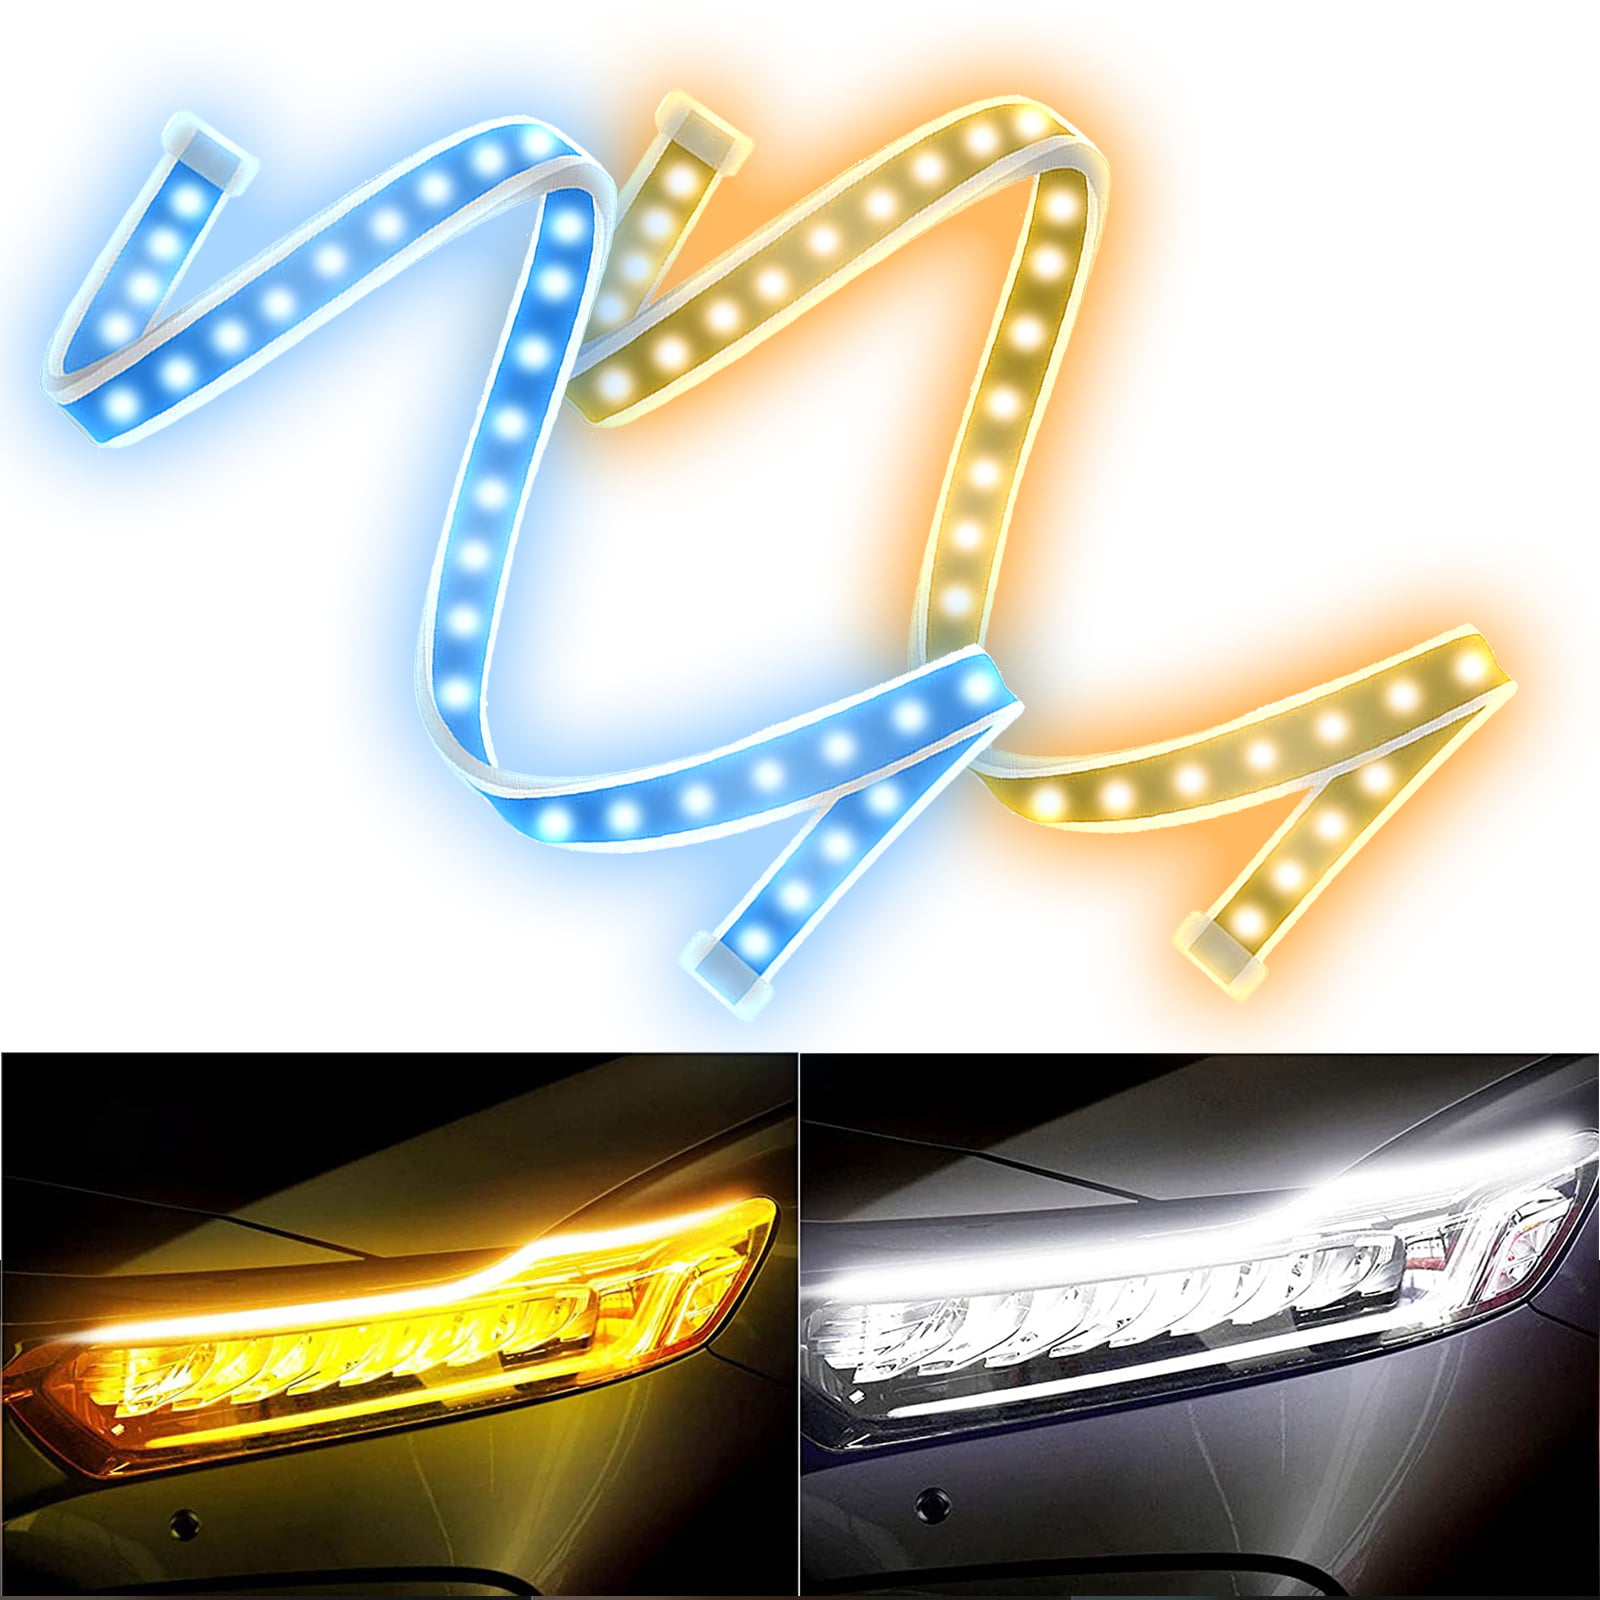 DRL Led Strip Lights for Cars,24 Inch Exterior Switchback Daytime Running Light Amber Yellow/White Sequential Headlight Turn Signal Light Waterproof Flexible Lamps 2 PCS 